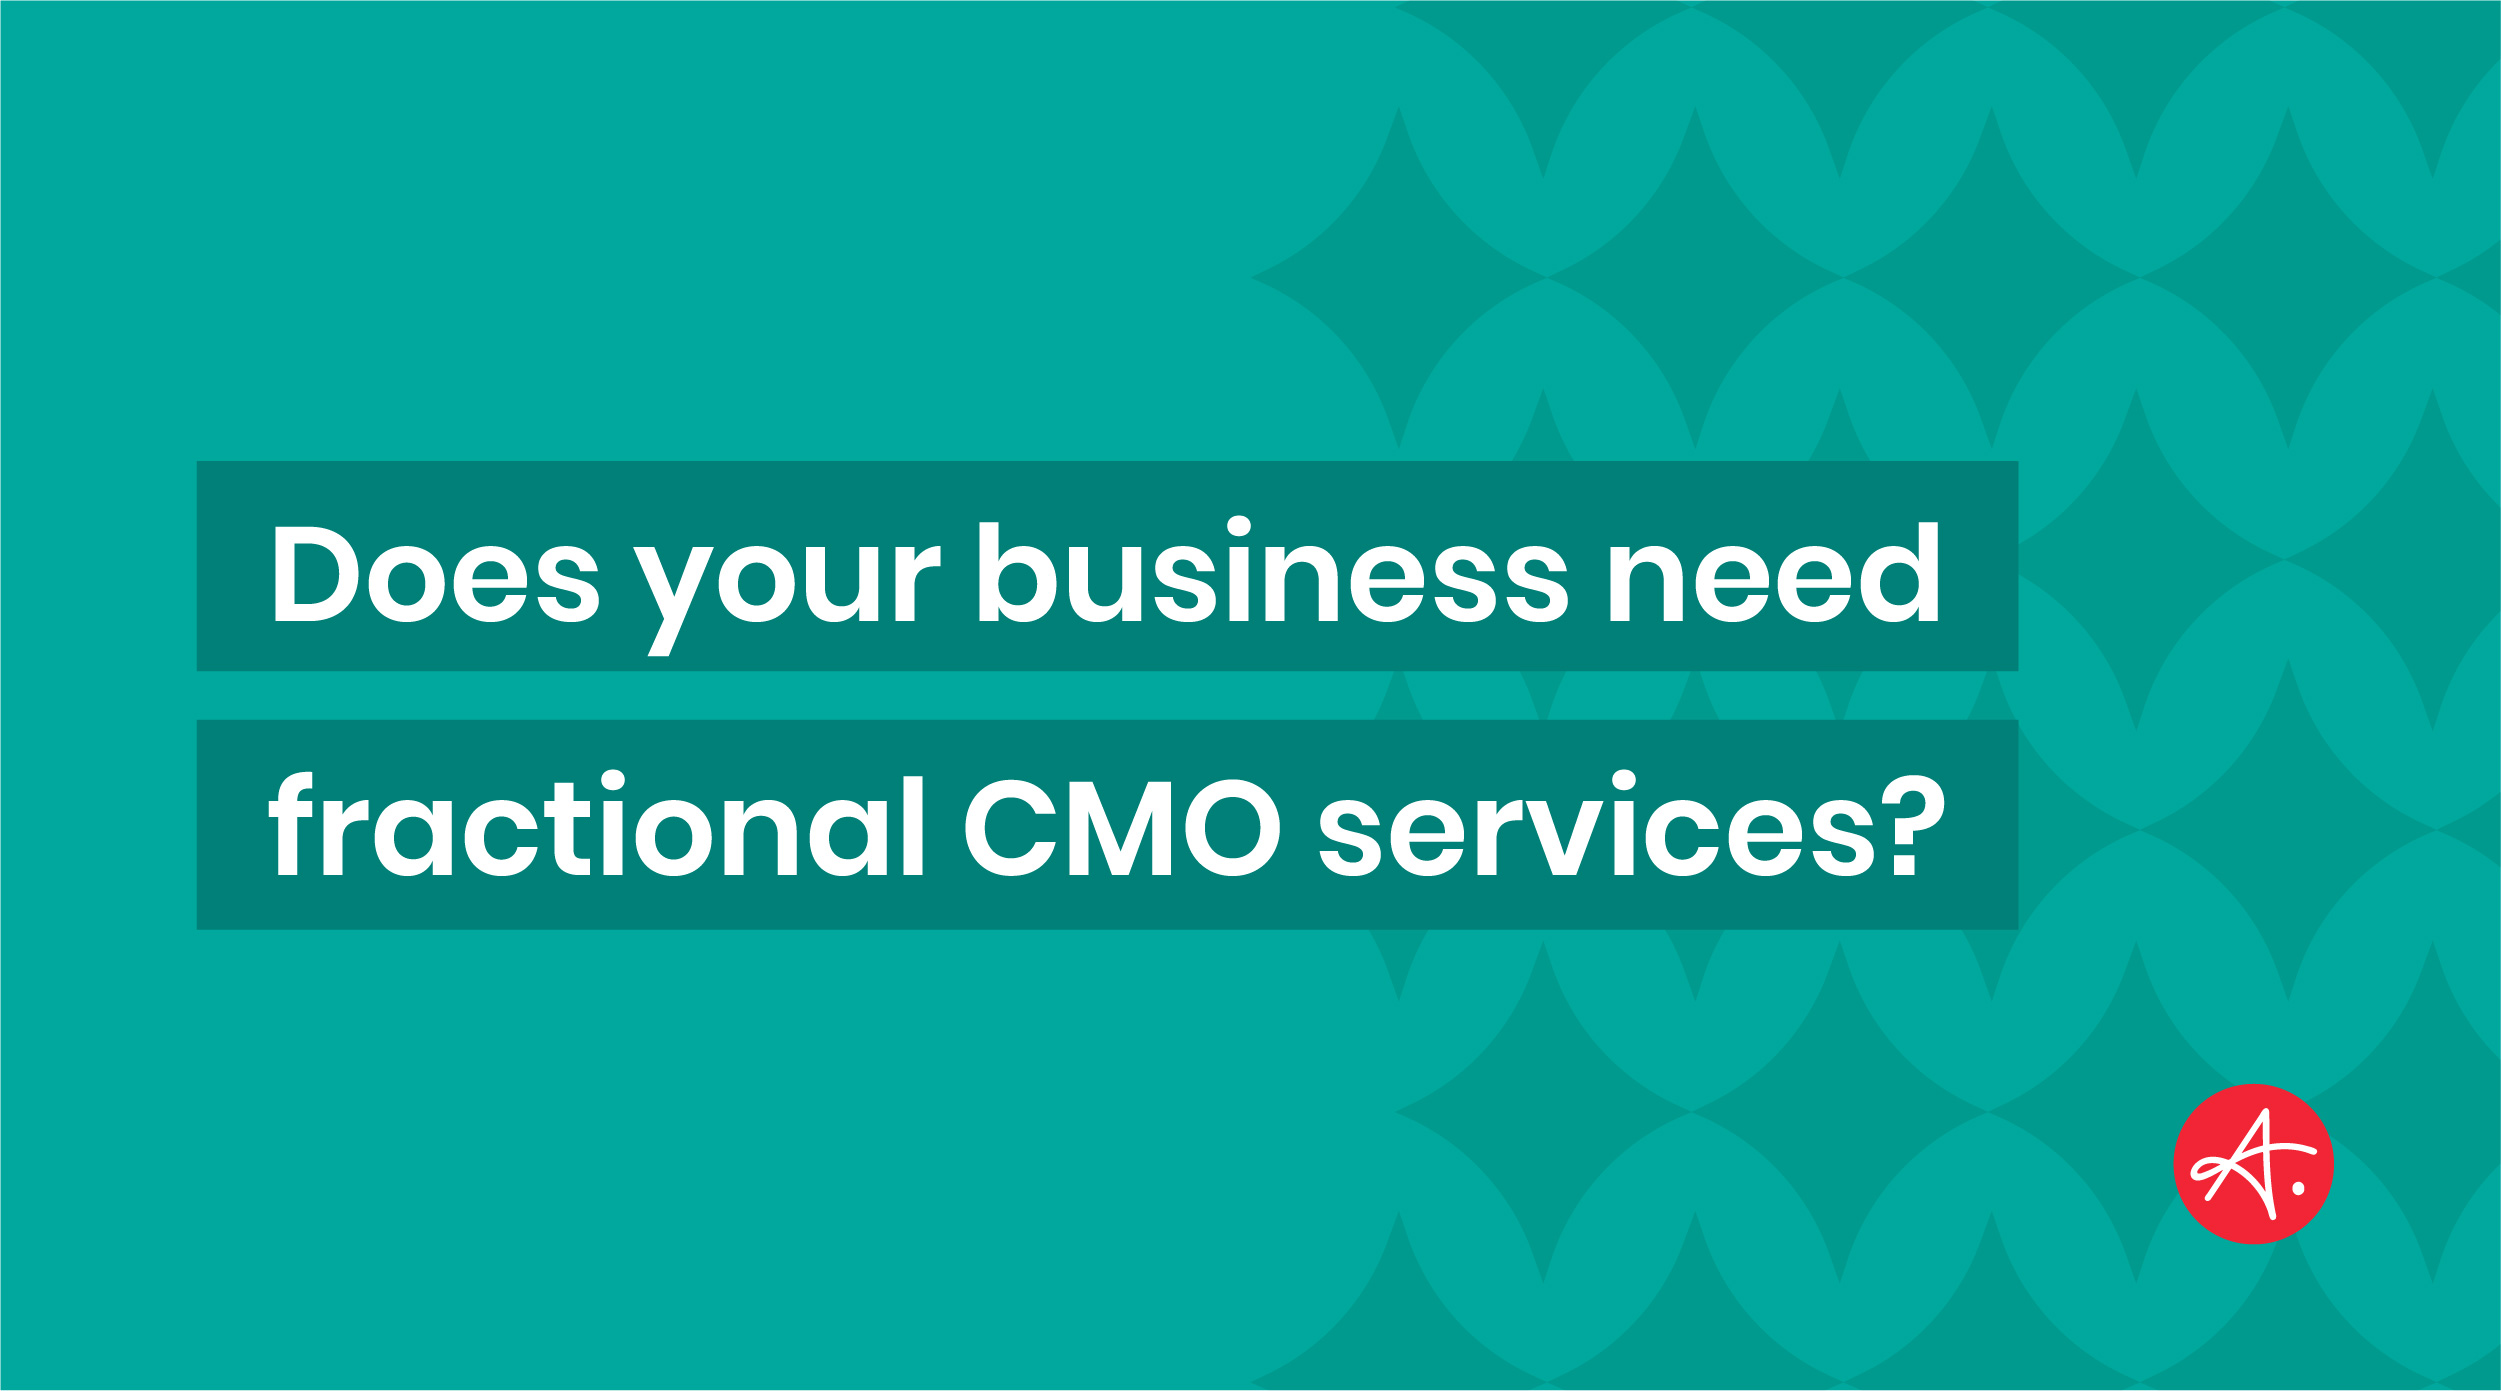 Does your business need fractional CMO services?